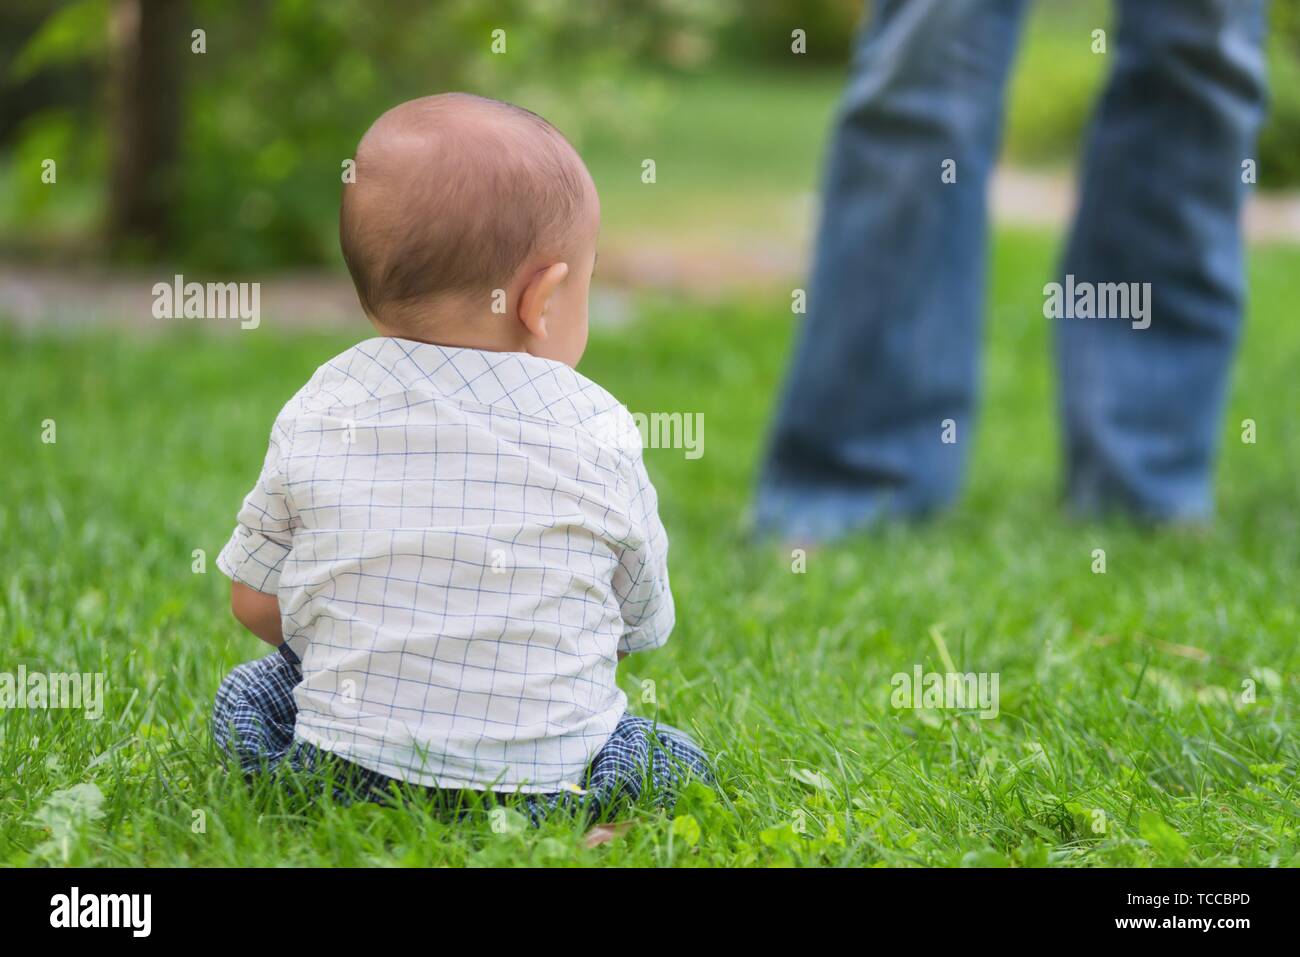 Dangerous situation, baby lost in the park, unknown person approaching. Stock Photo